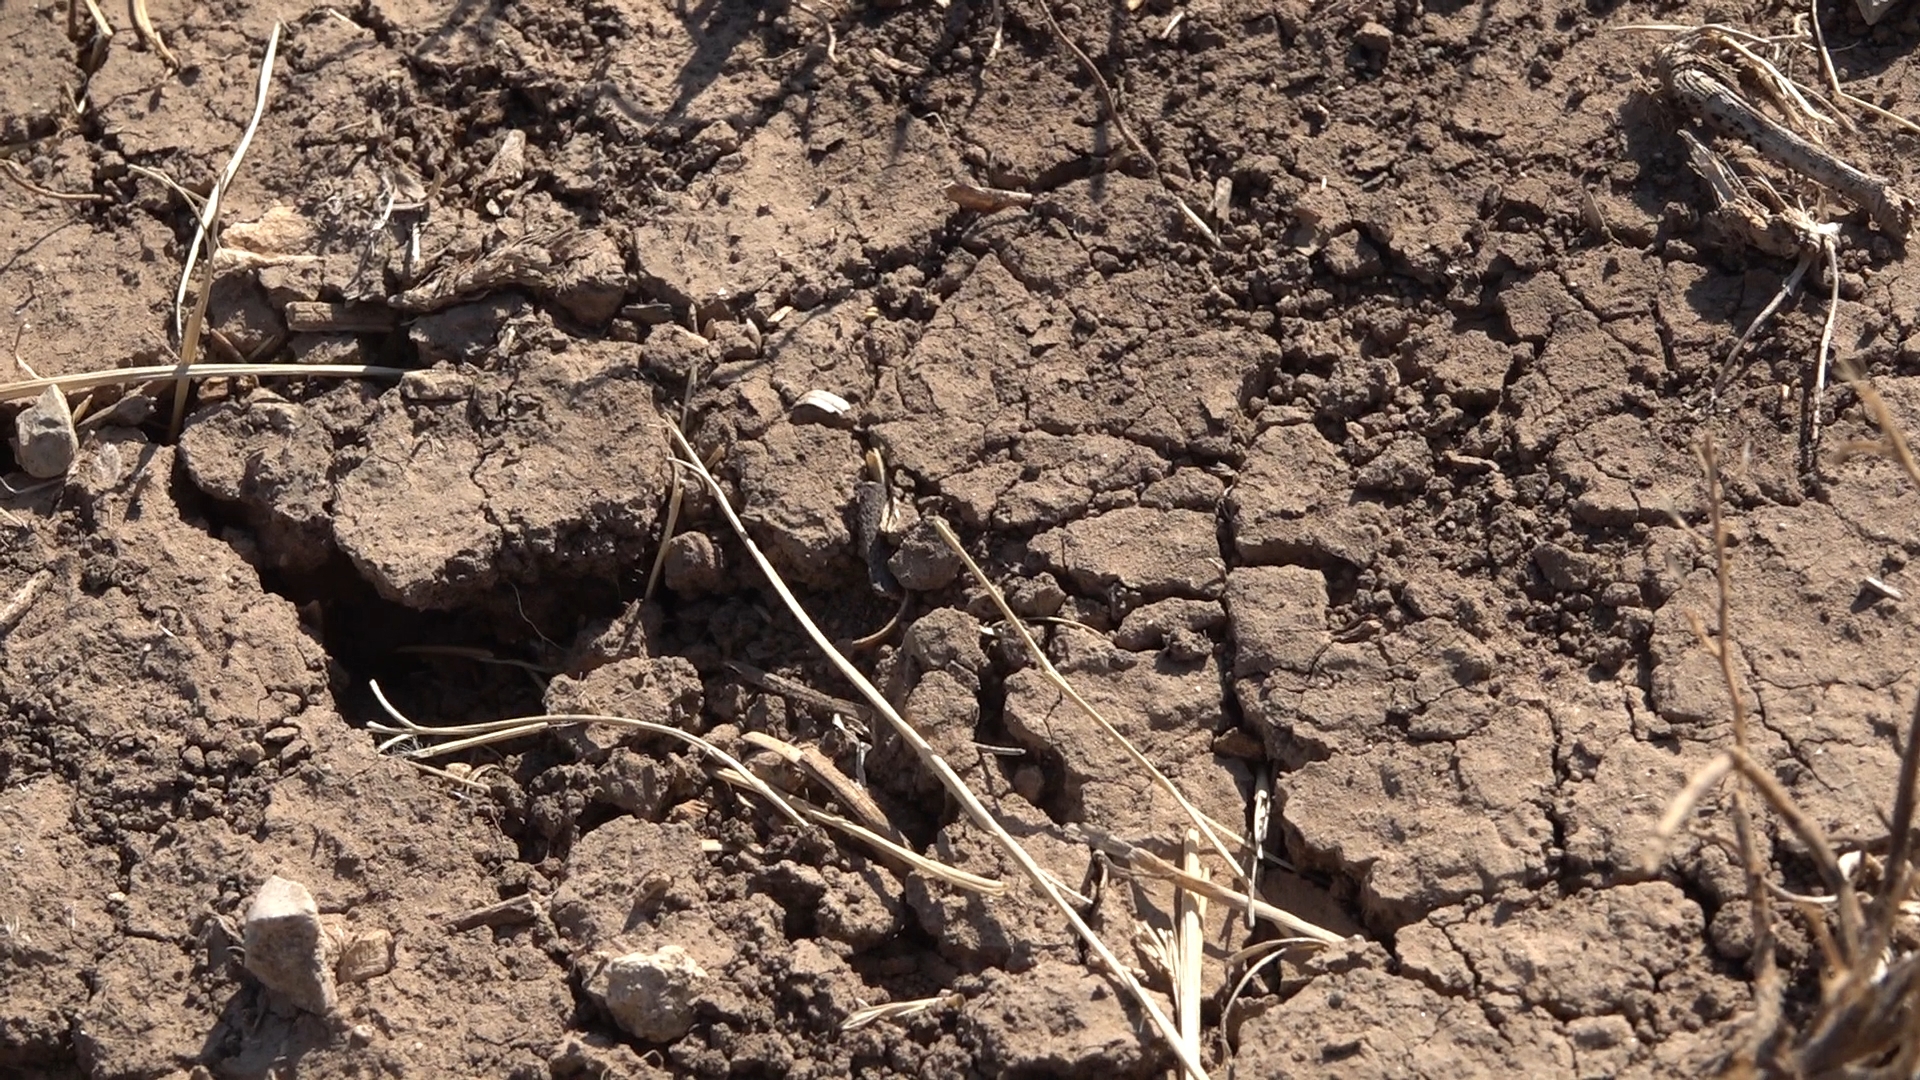 Farmers in West Texas have been experiencing drought conditions for the past three years. In Wharton County, farmers are assessing damages but expect record cotton.